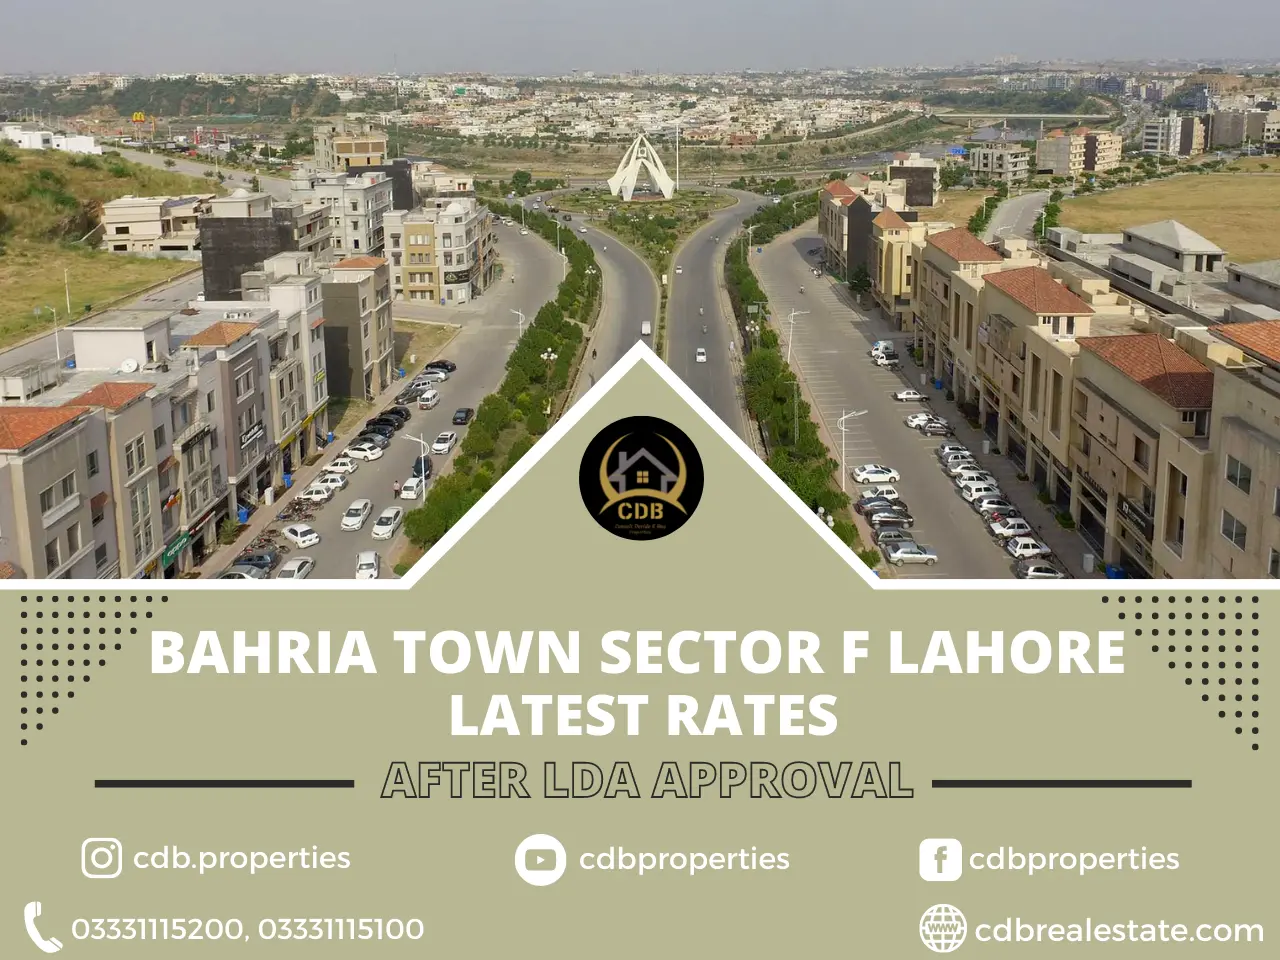 latest rates in bahria town after lda approval